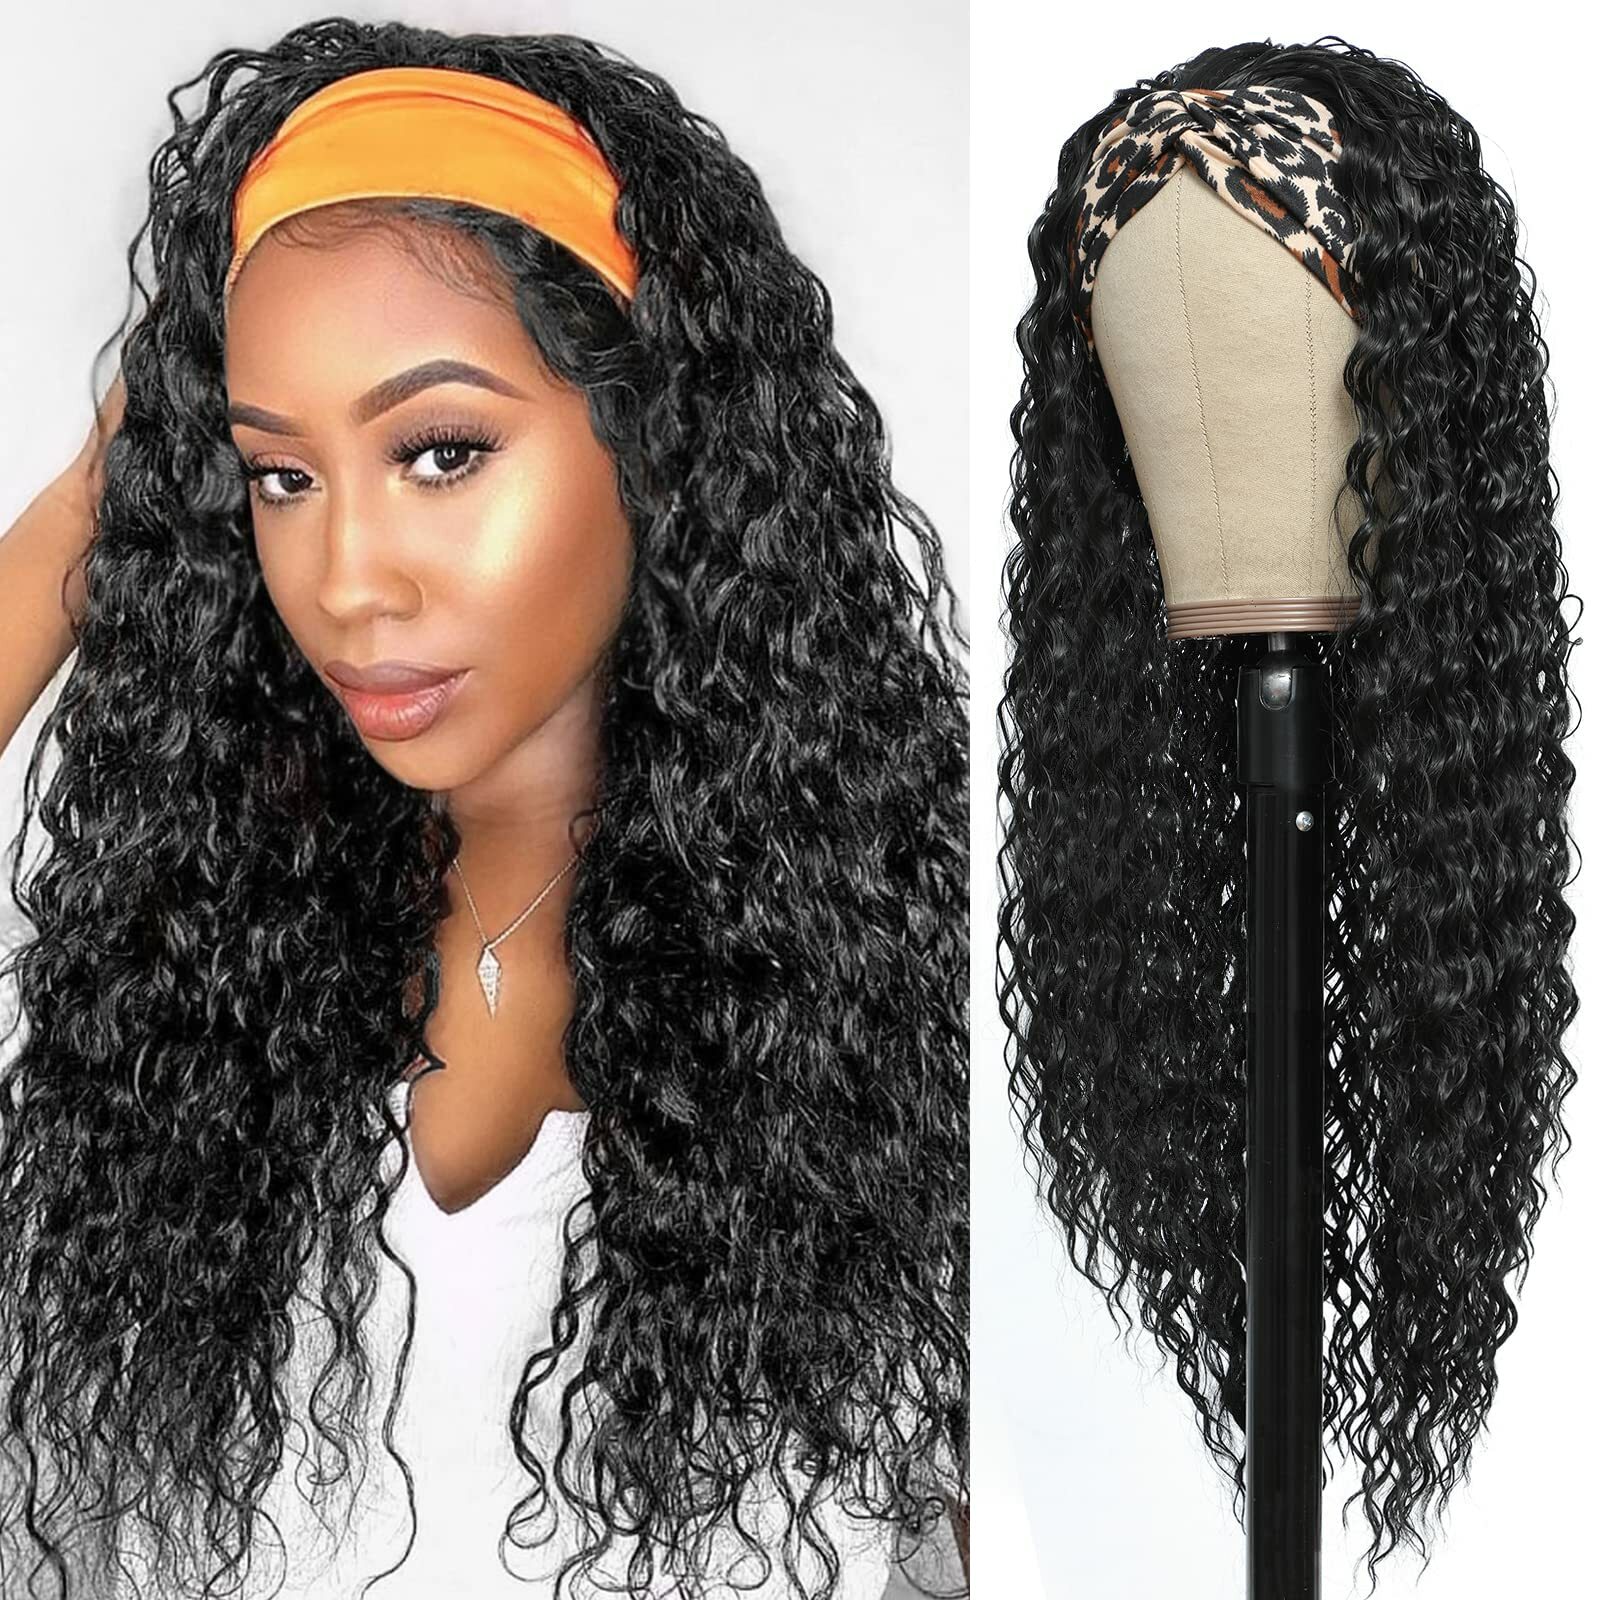 water curly natural color headband wigs 1